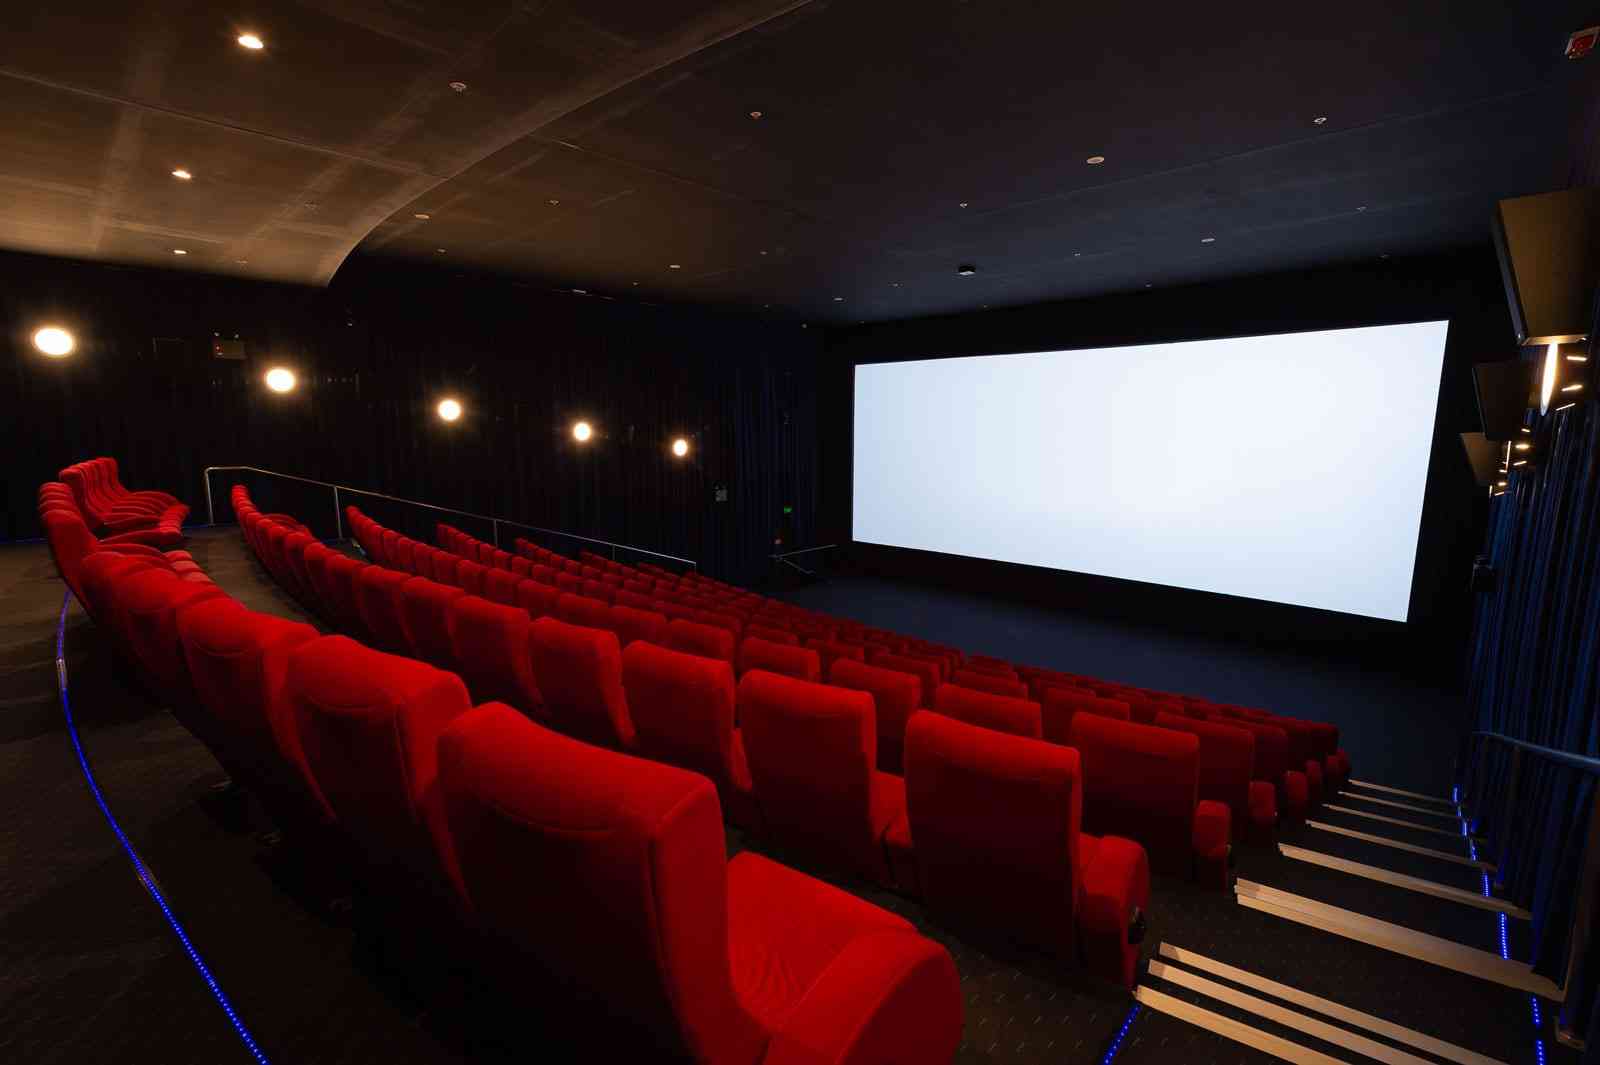 8 UNEXPECTED PLACES TO SEE A MOVIE ON THE GOLD COAST